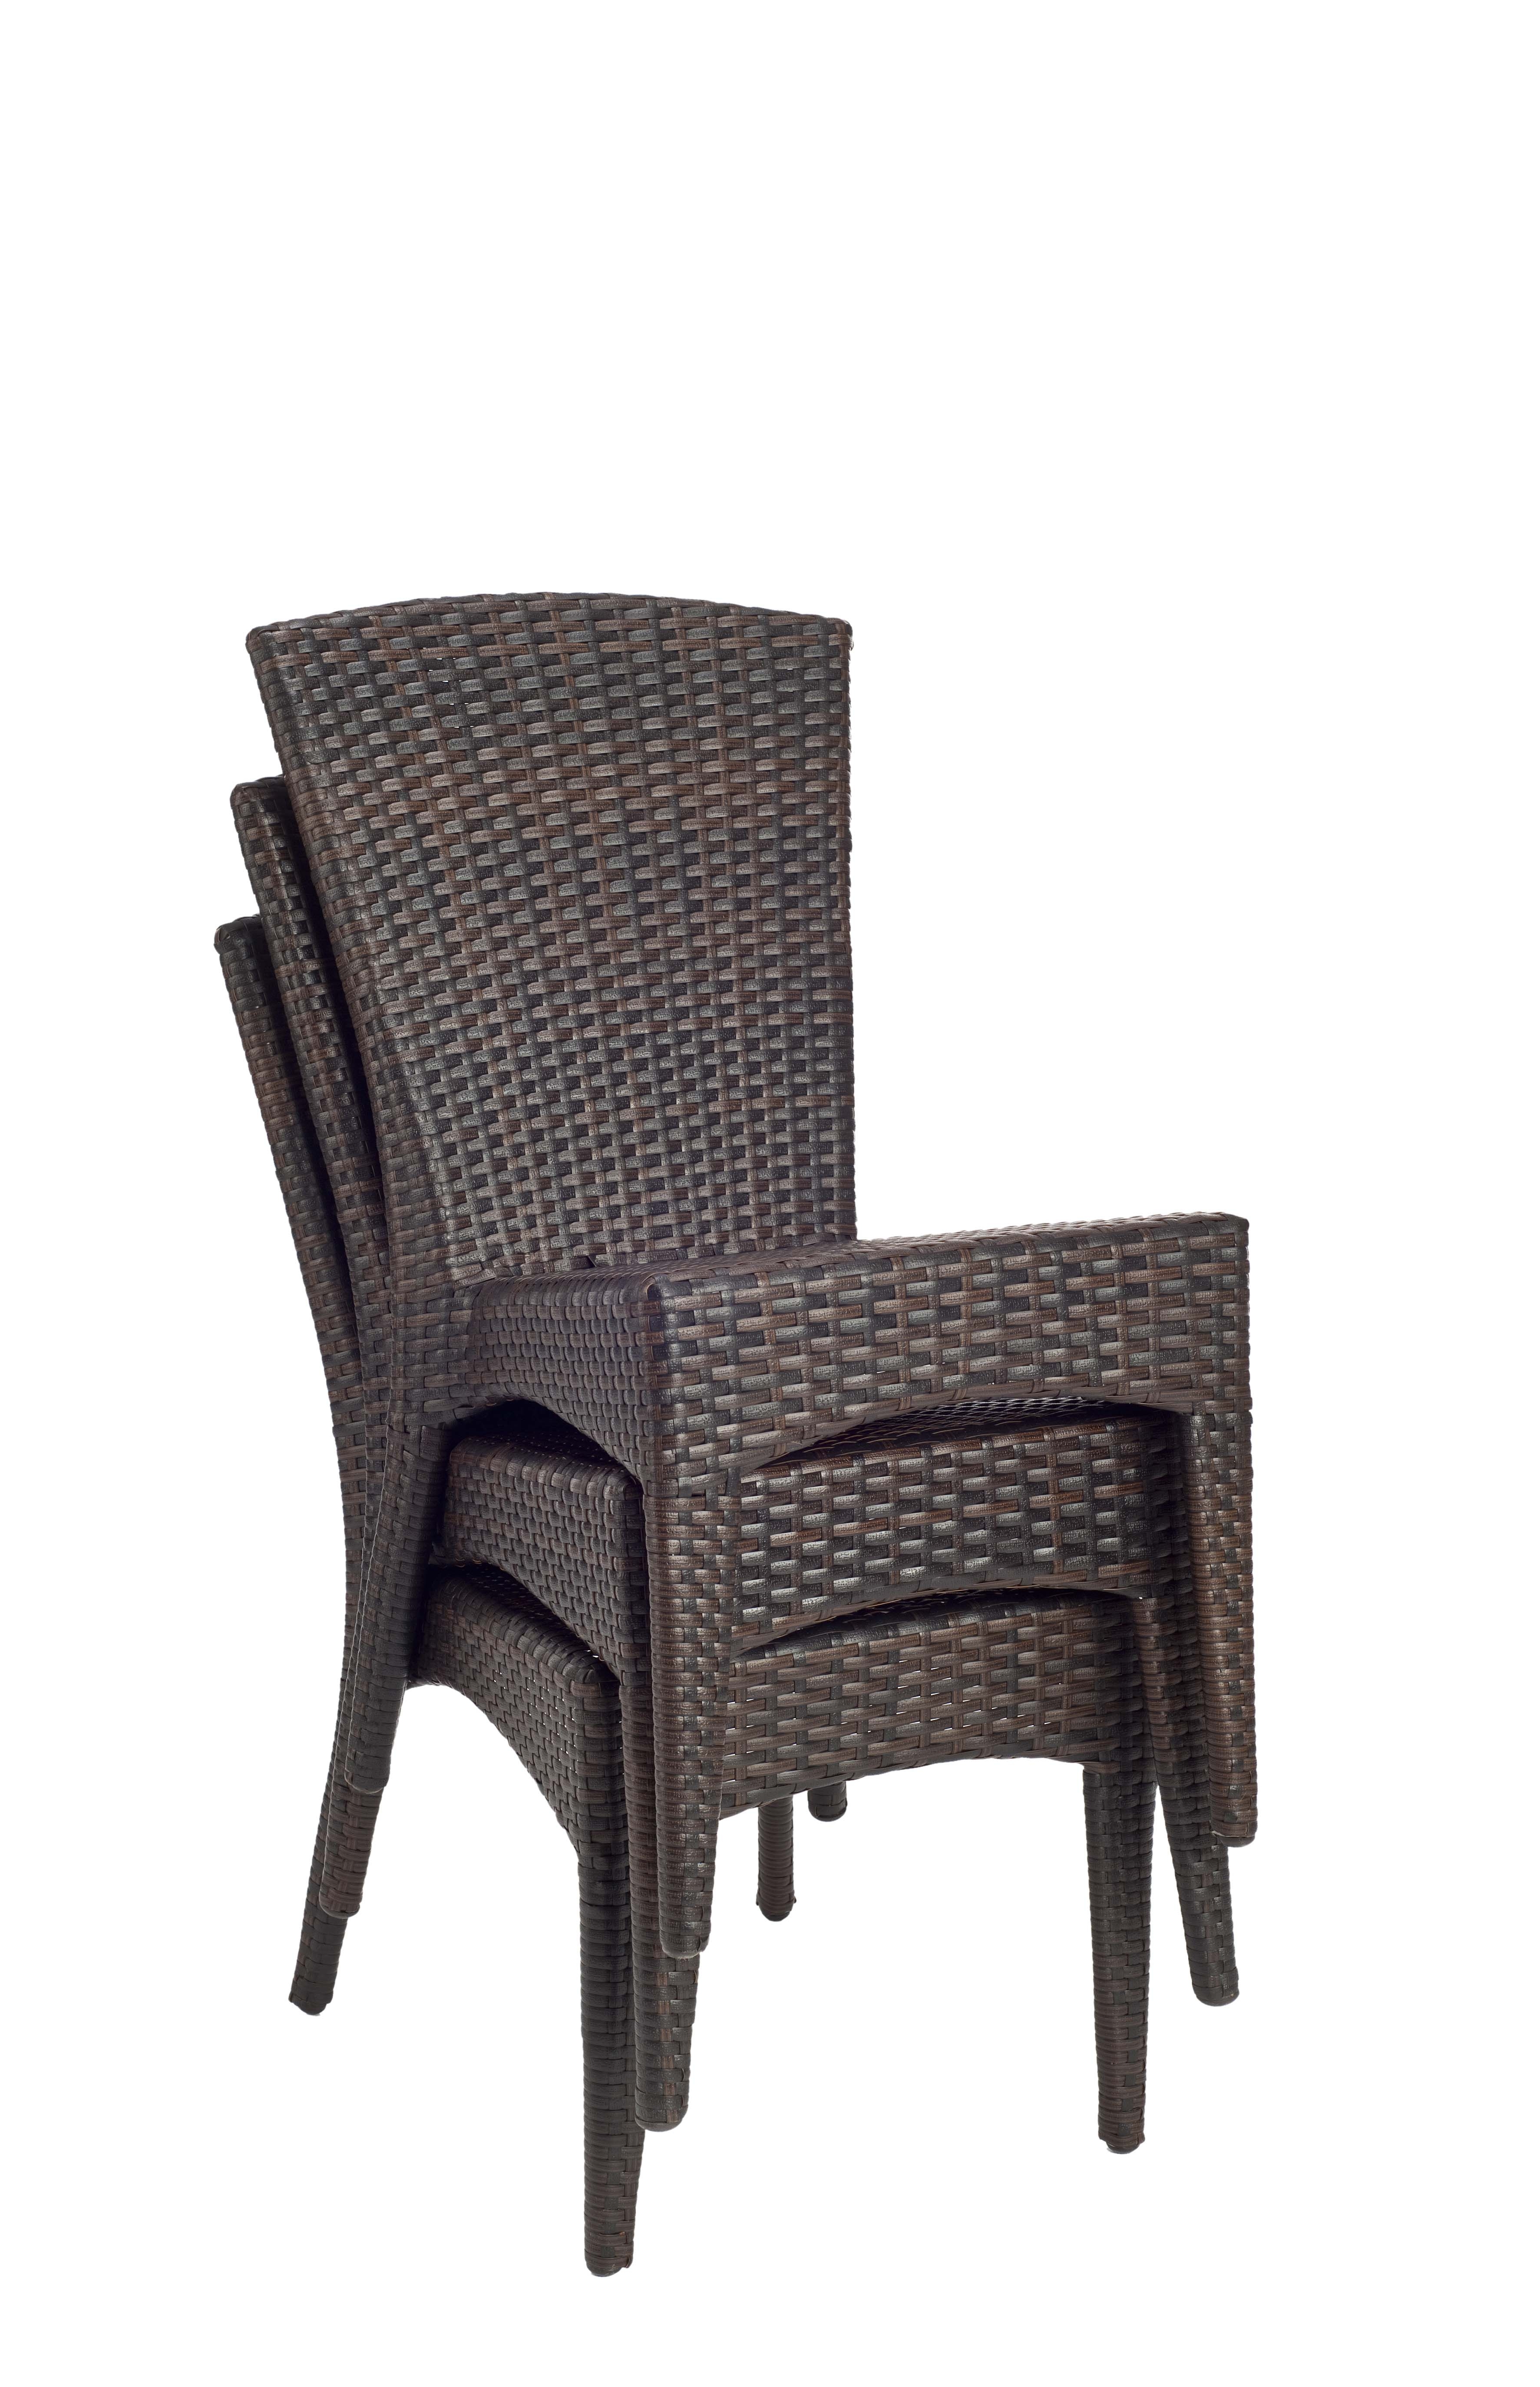 New Castle Wicker Side Chair - Black/Brown - Arlo Home - Image 5